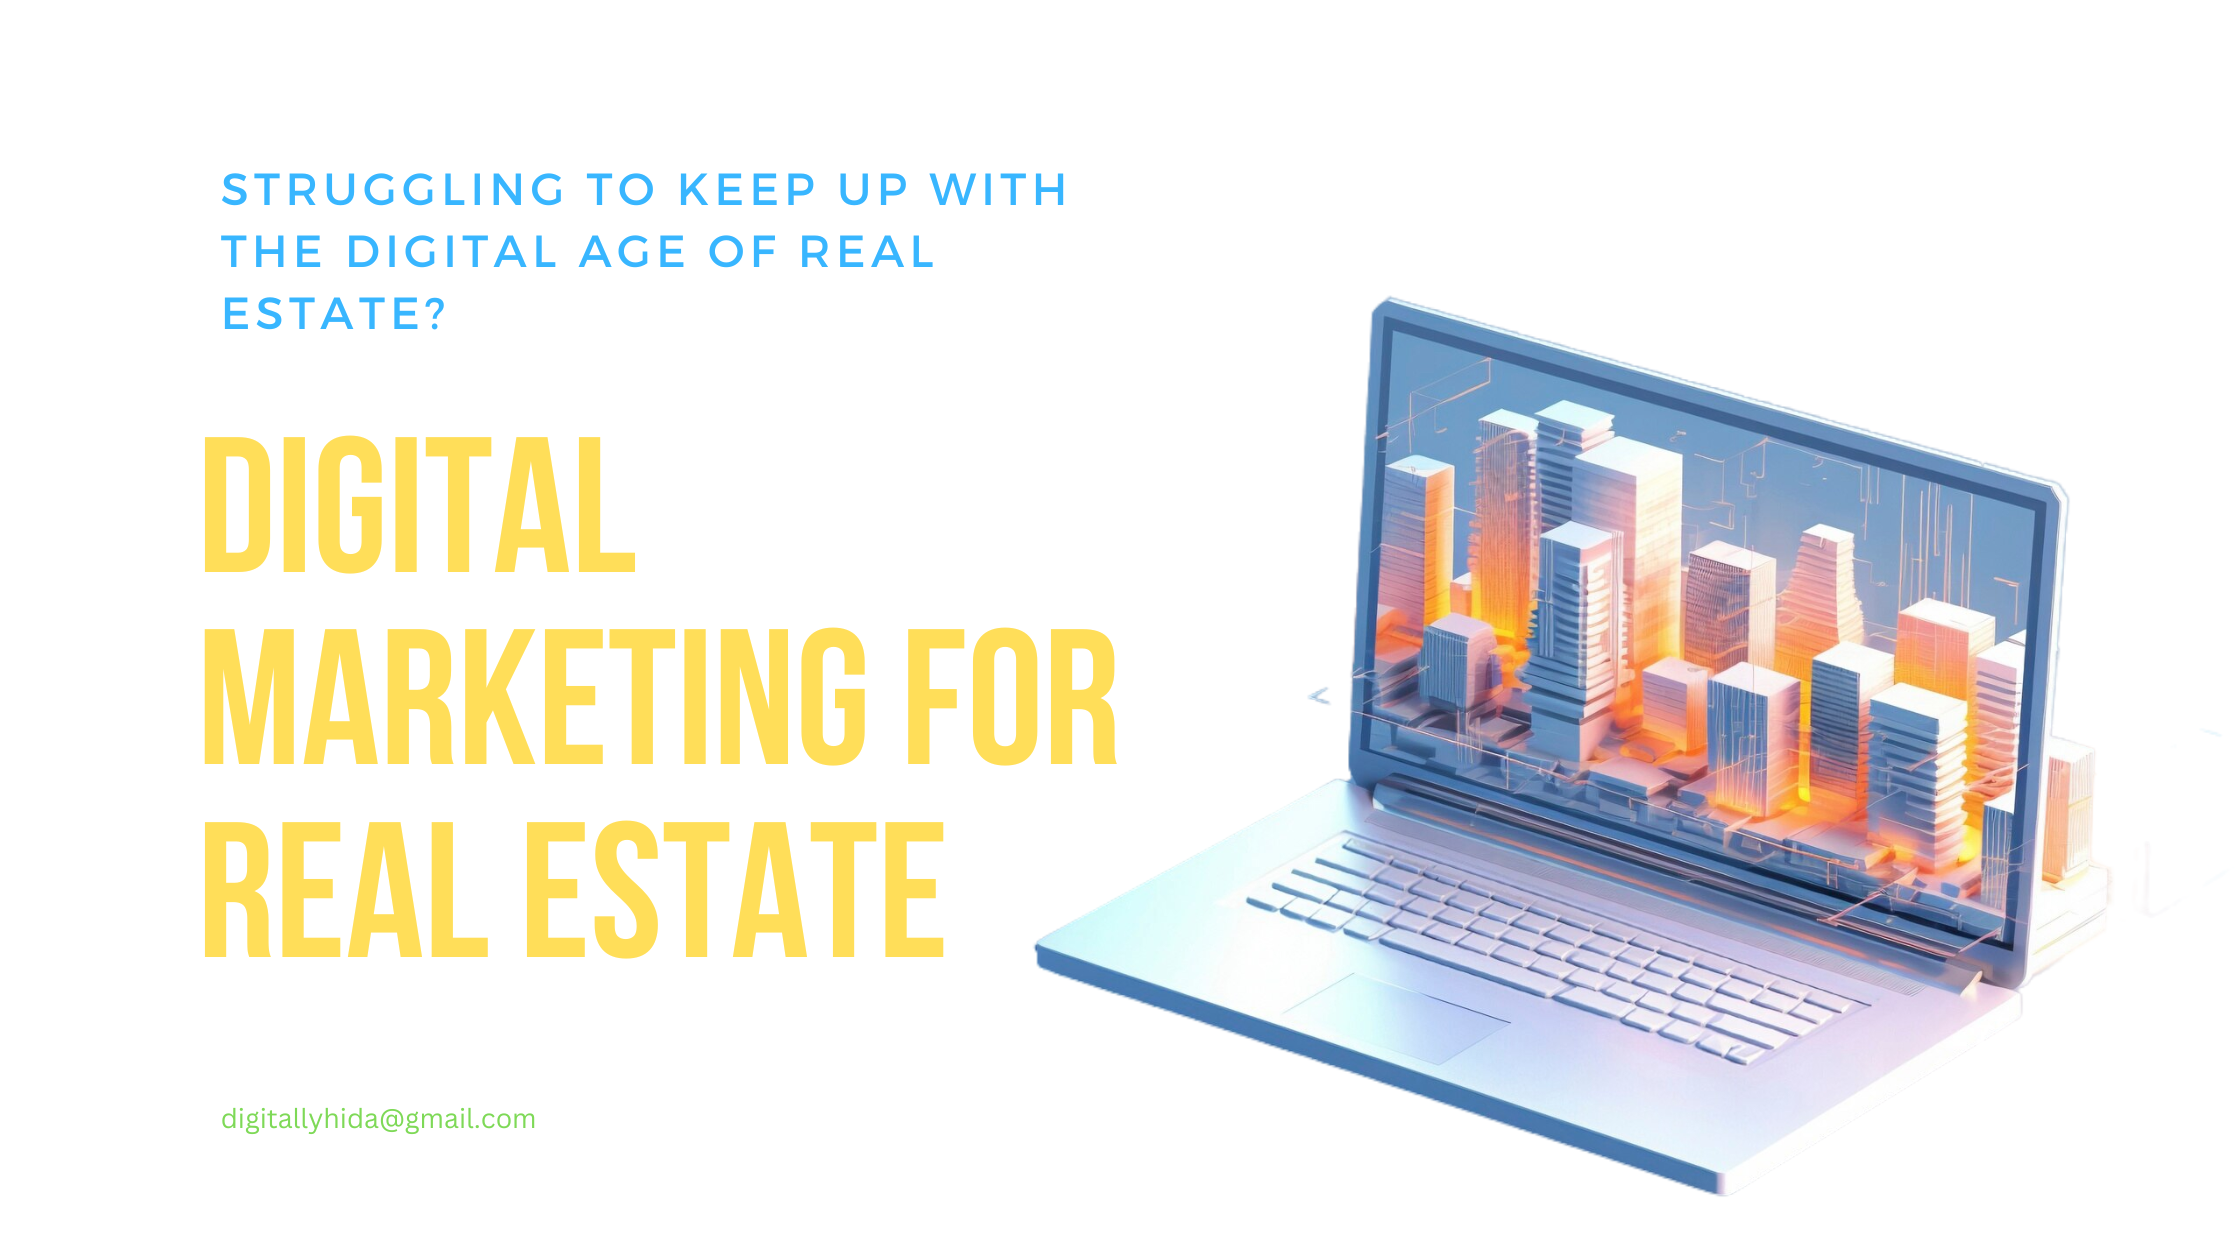 Struggling to Keep Up With the Digital Age of Real Estate?